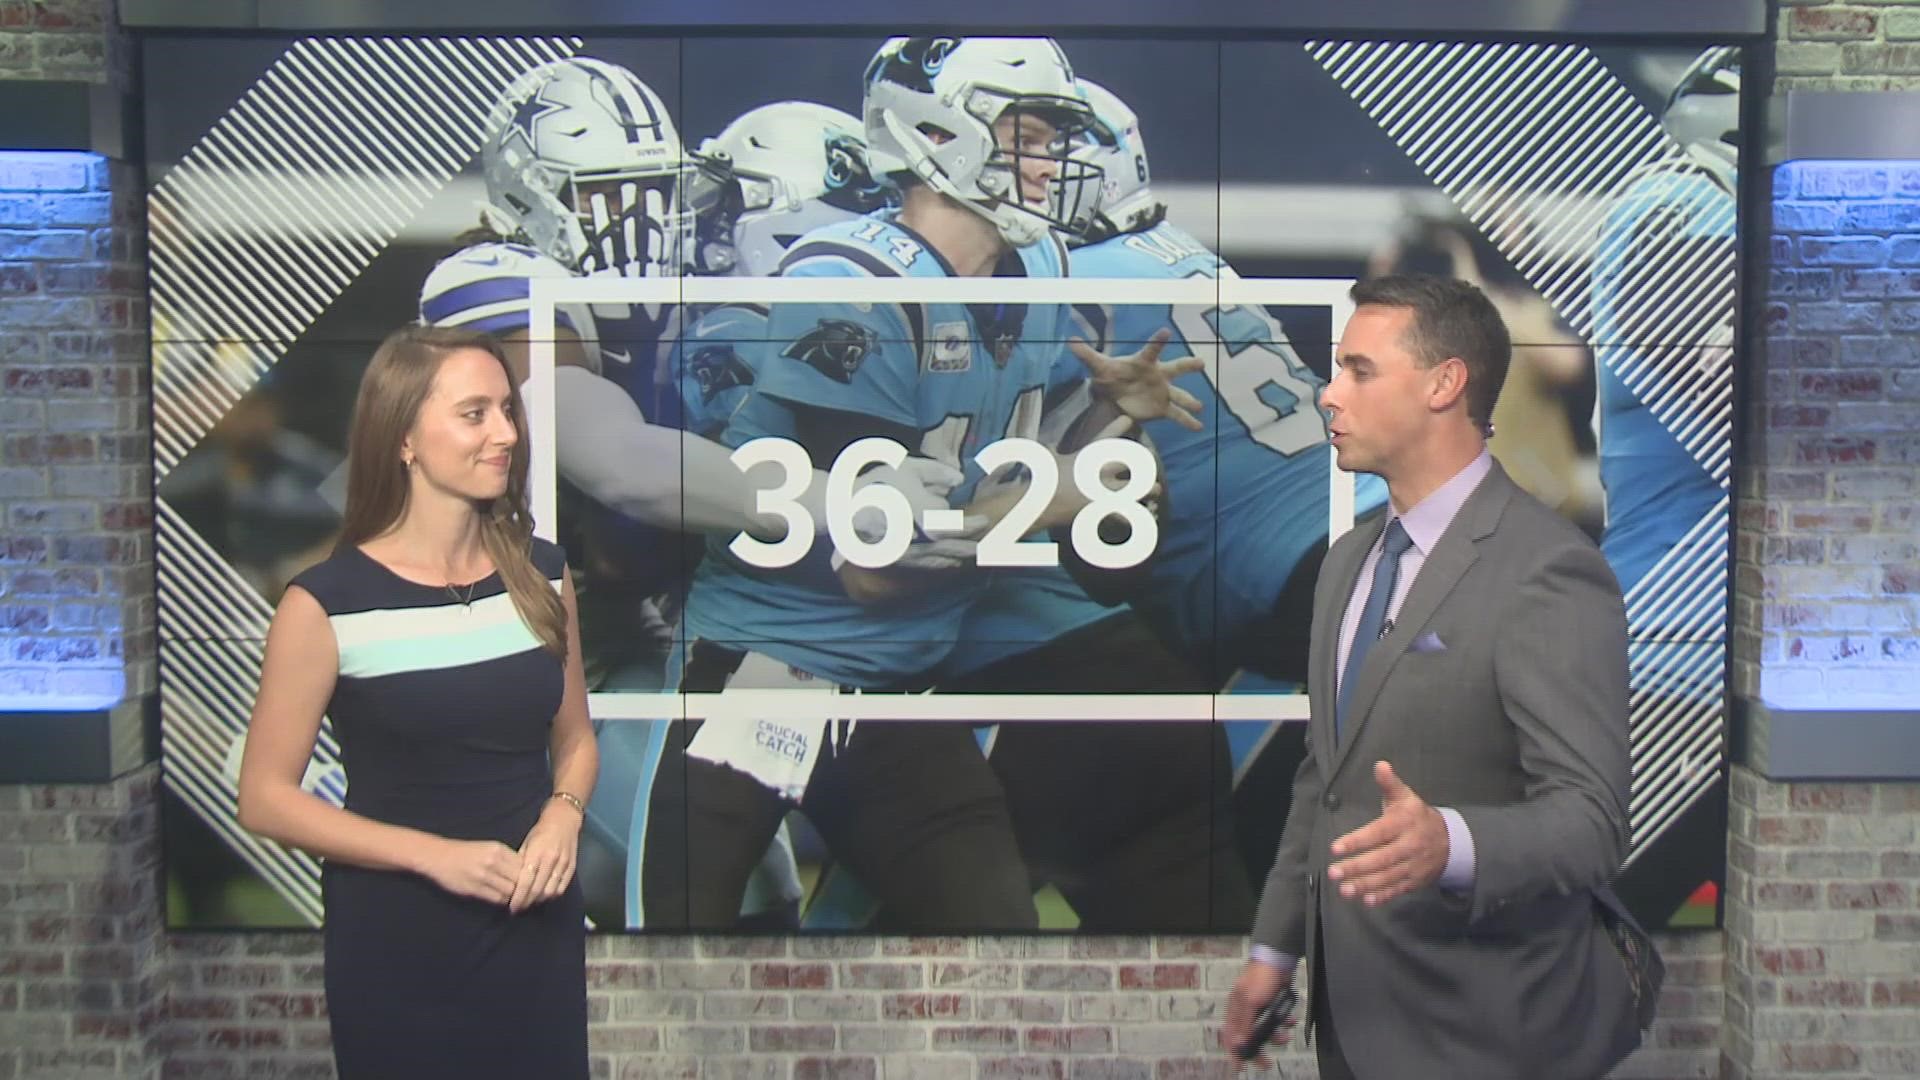 The WCNC Sports team tells you what they're buying and selling about the Panthers after Carolina's first loss of the season on Sunday.